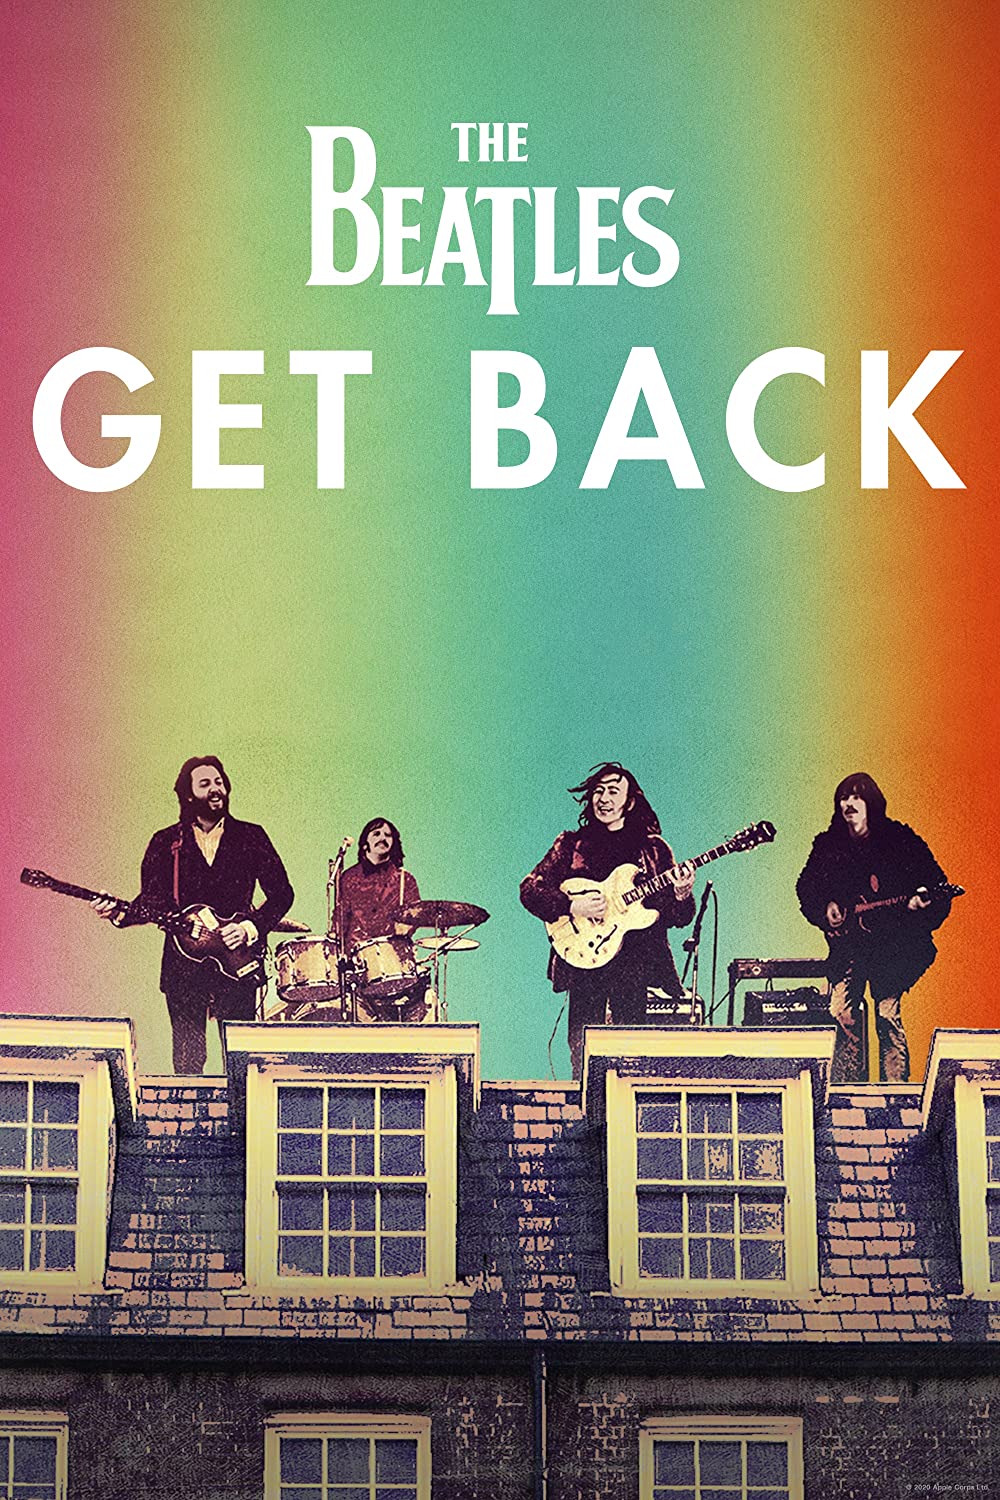 The Beatles Get Back Series cover, Photo Courtesy of: Google Images